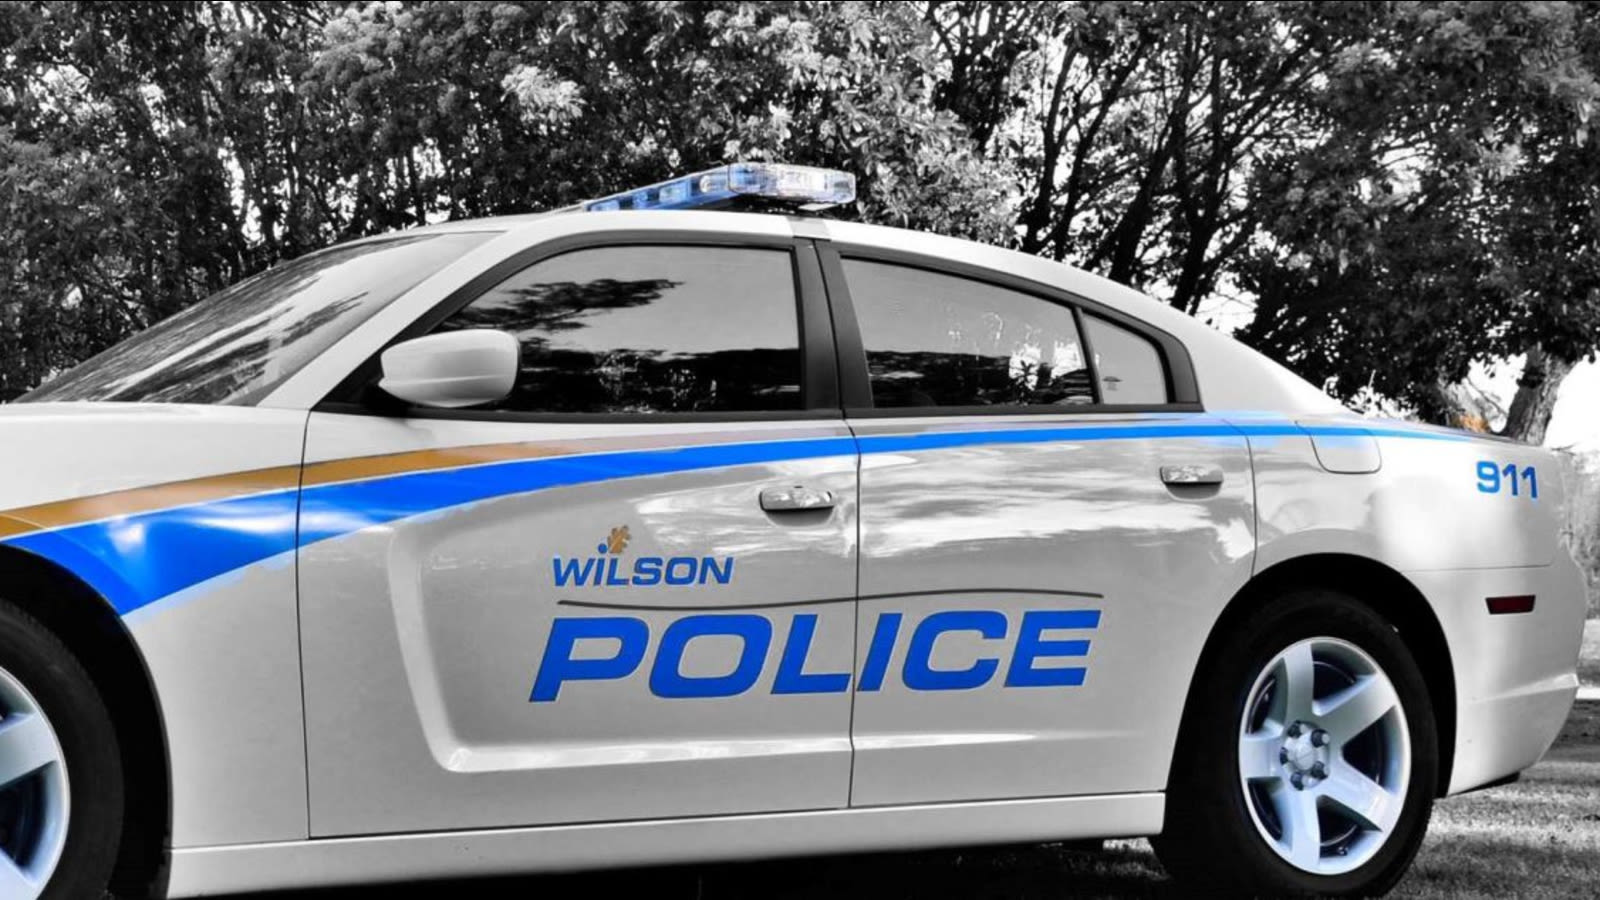 1 person dead after officer-involved shooting in Wilson, police say